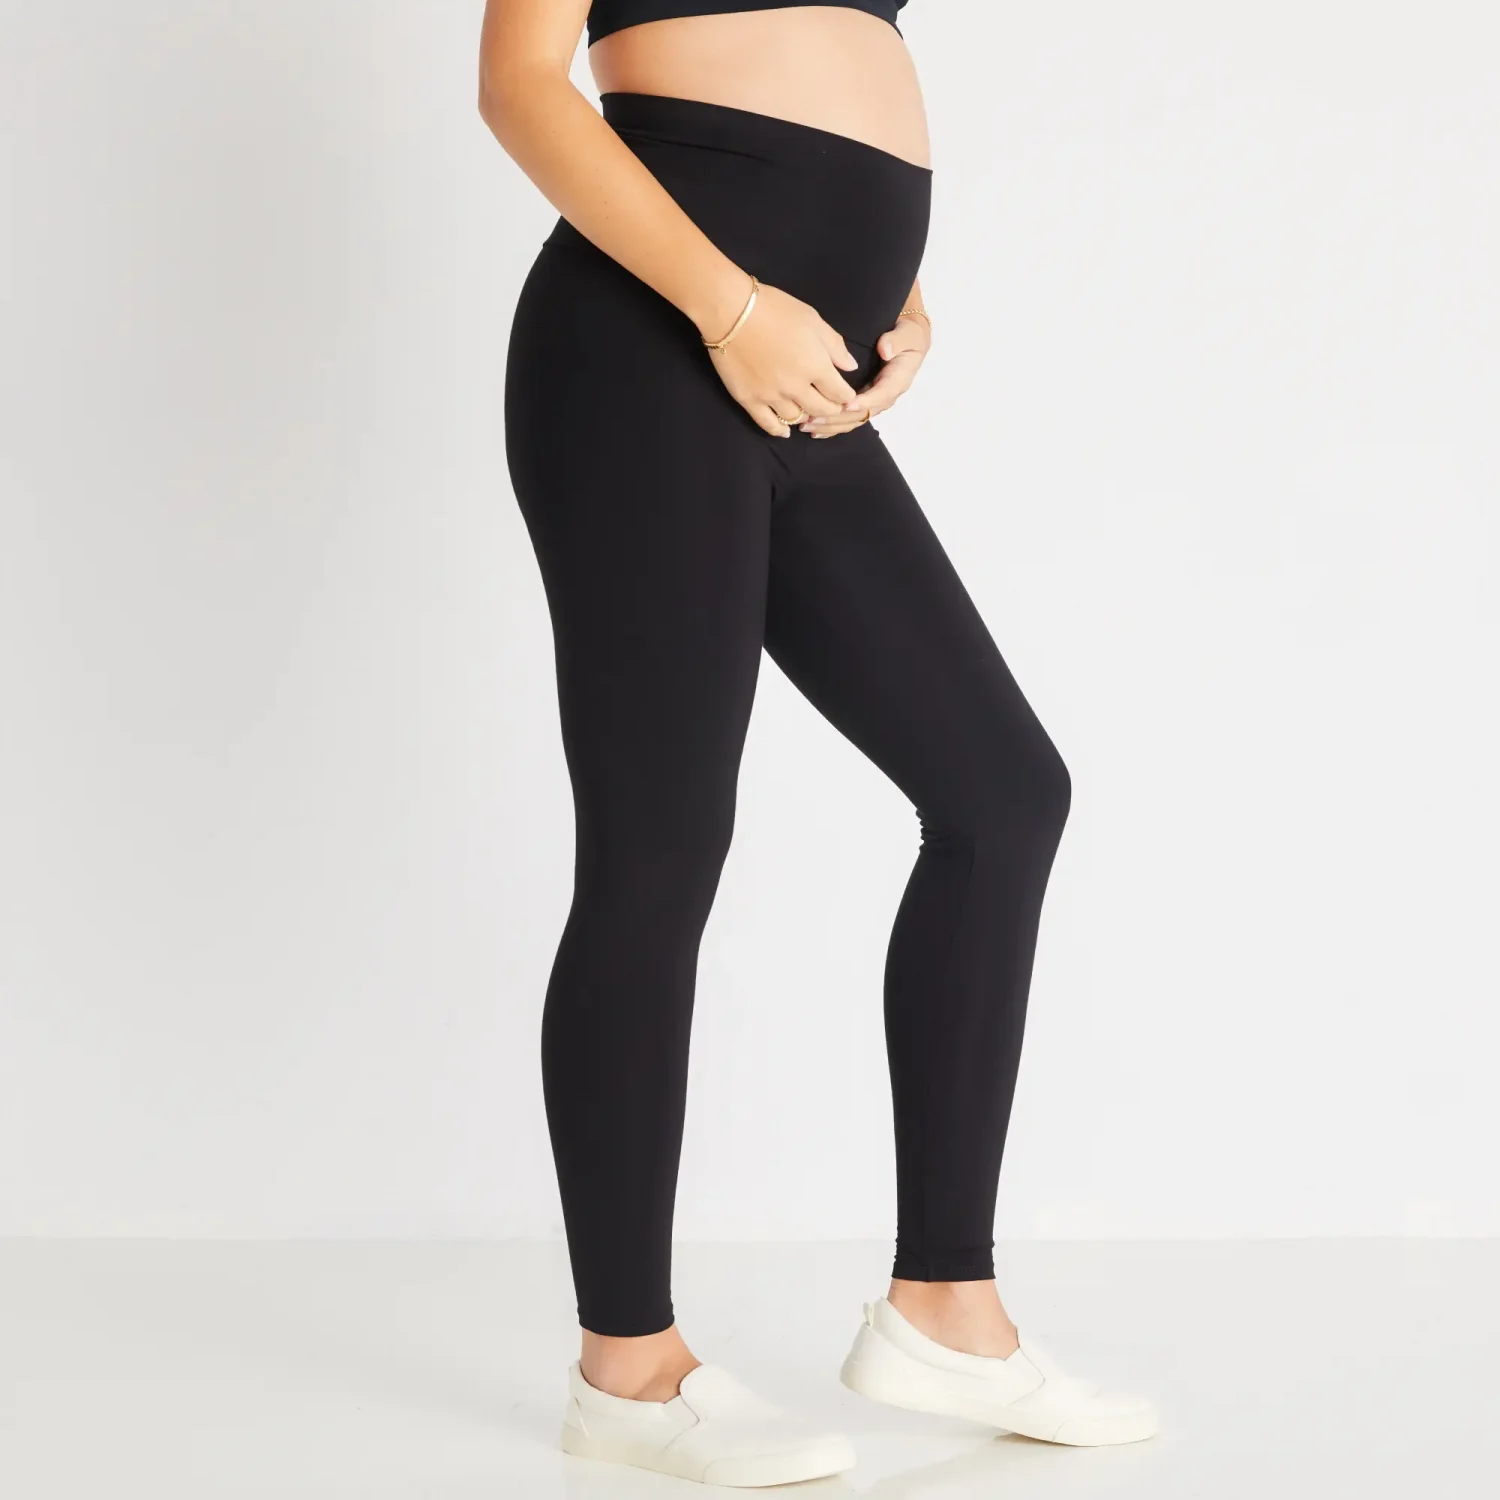 Hatch brand before during and after maternity black leggings